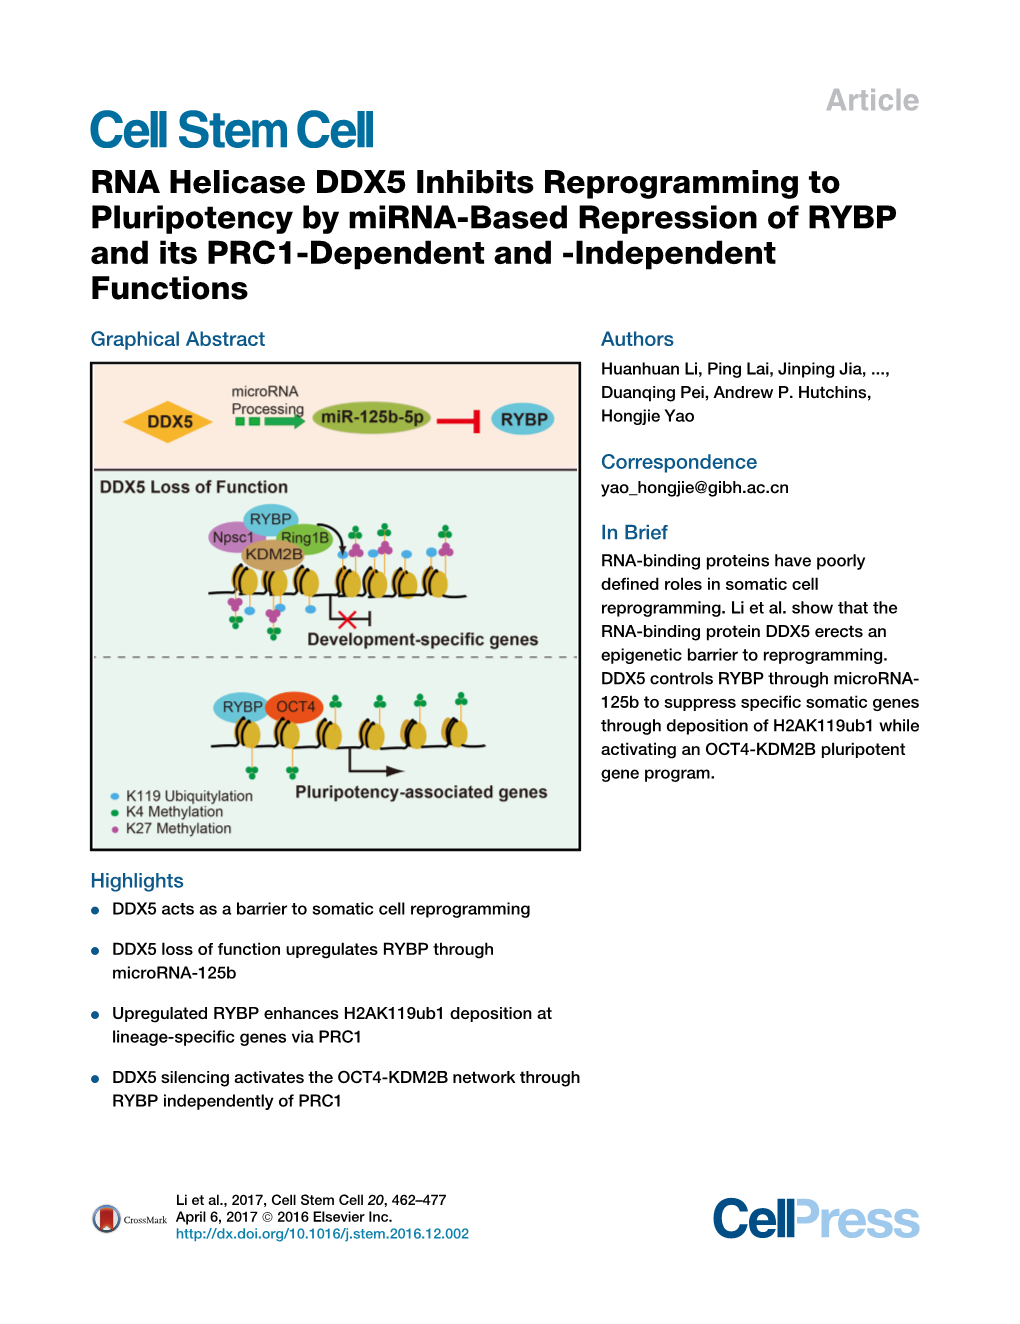 RNA Helicase DDX5 Inhibits Reprogramming to Pluripotency by Mirna-Based Repression of RYBP and Its PRC1-Dependent and -Independent Functions